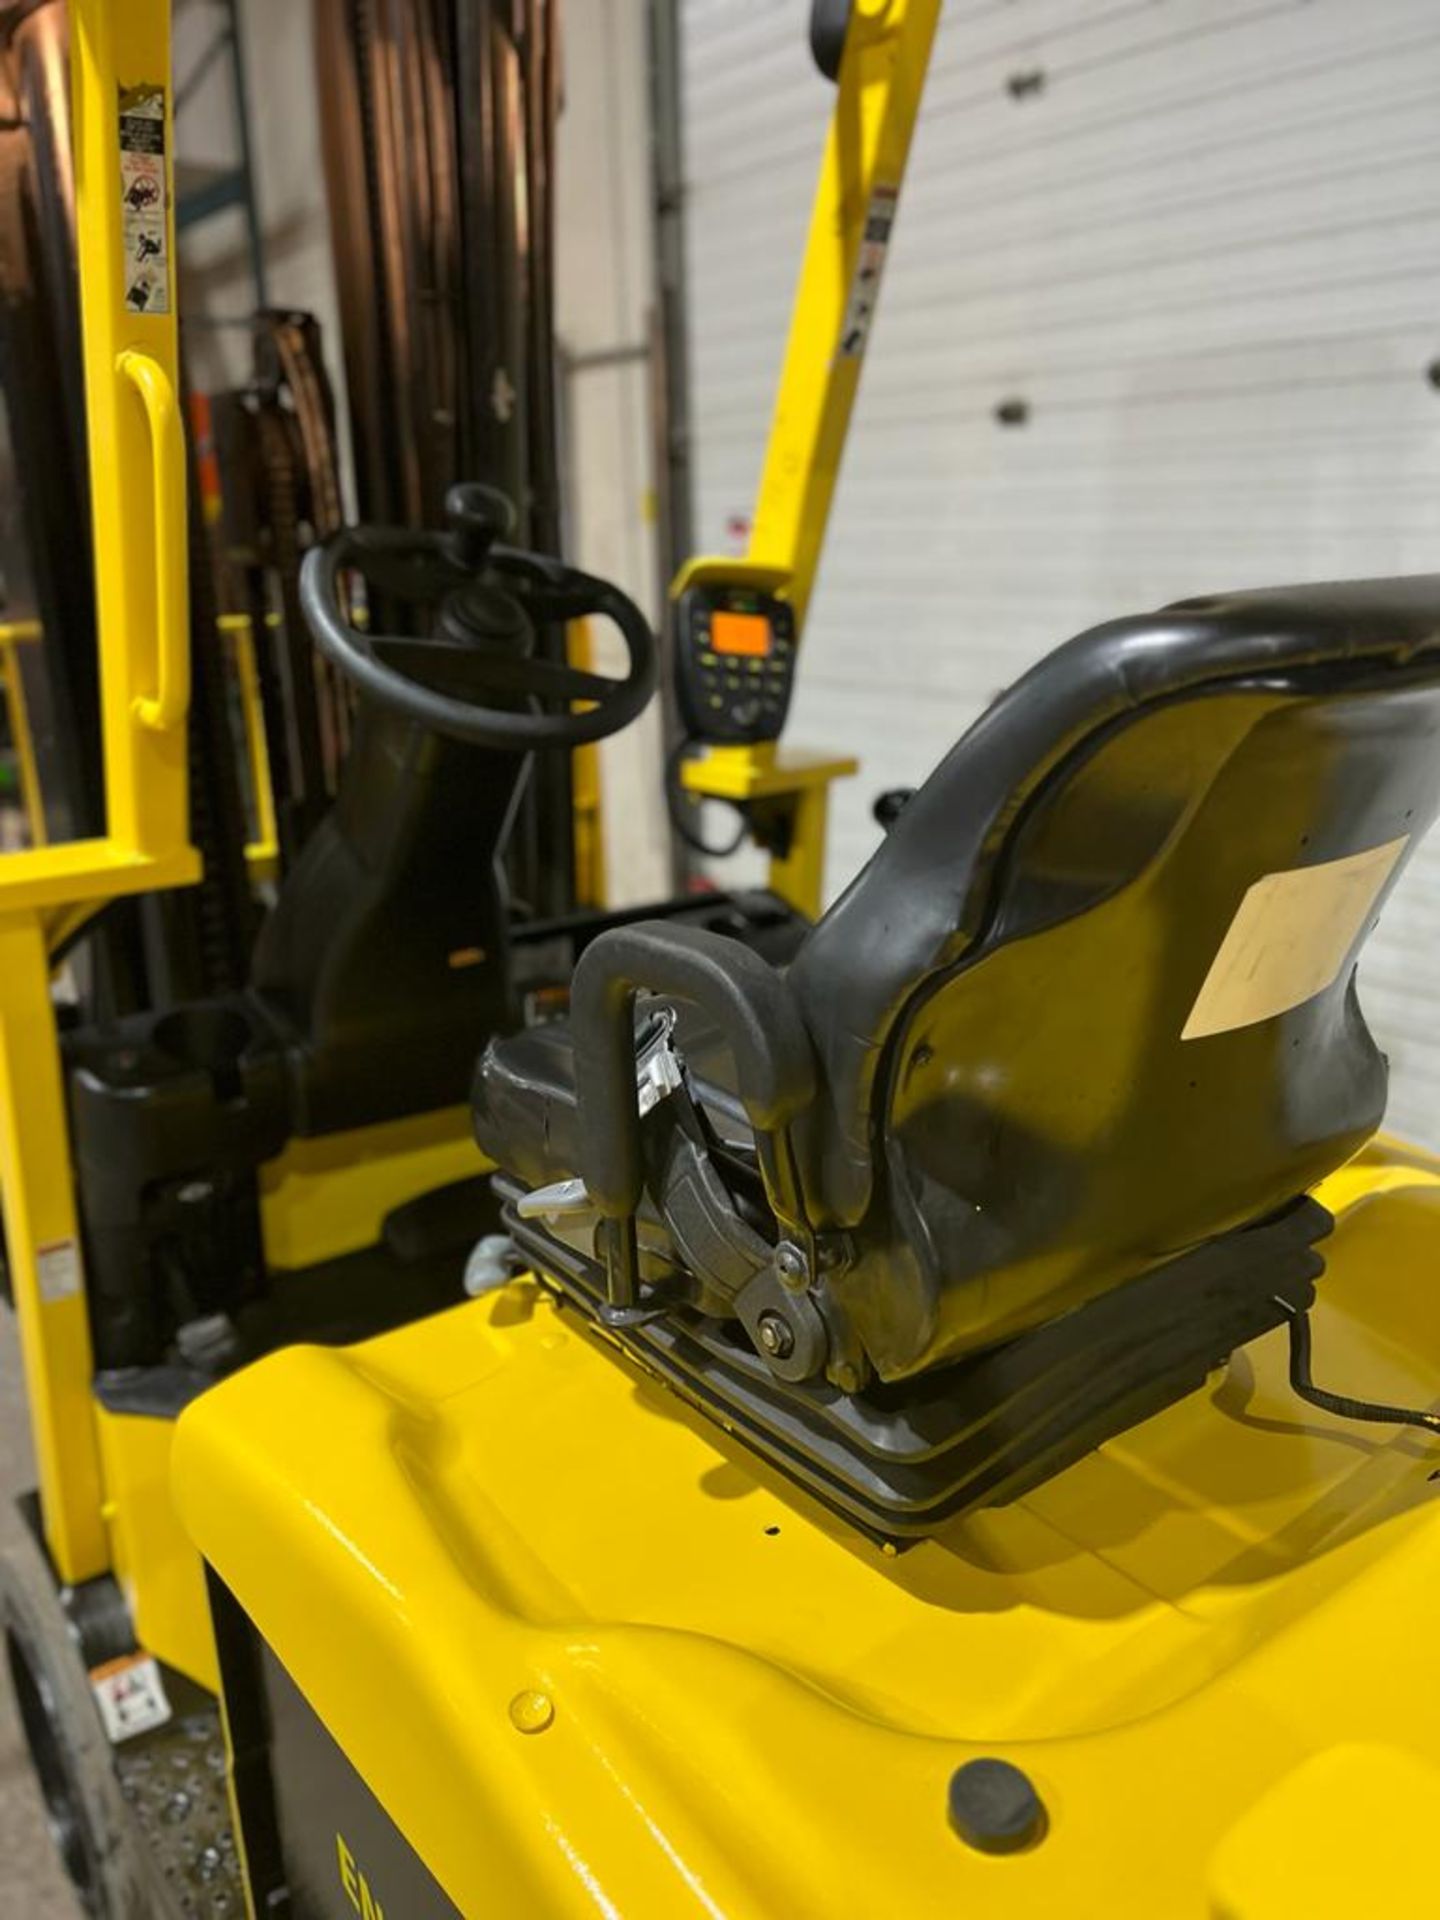 2017 Hyster 5,000lbs Capacity Forklift Electric with 48V Battery & 4-STAGE MAST with Sideshift - Image 3 of 4